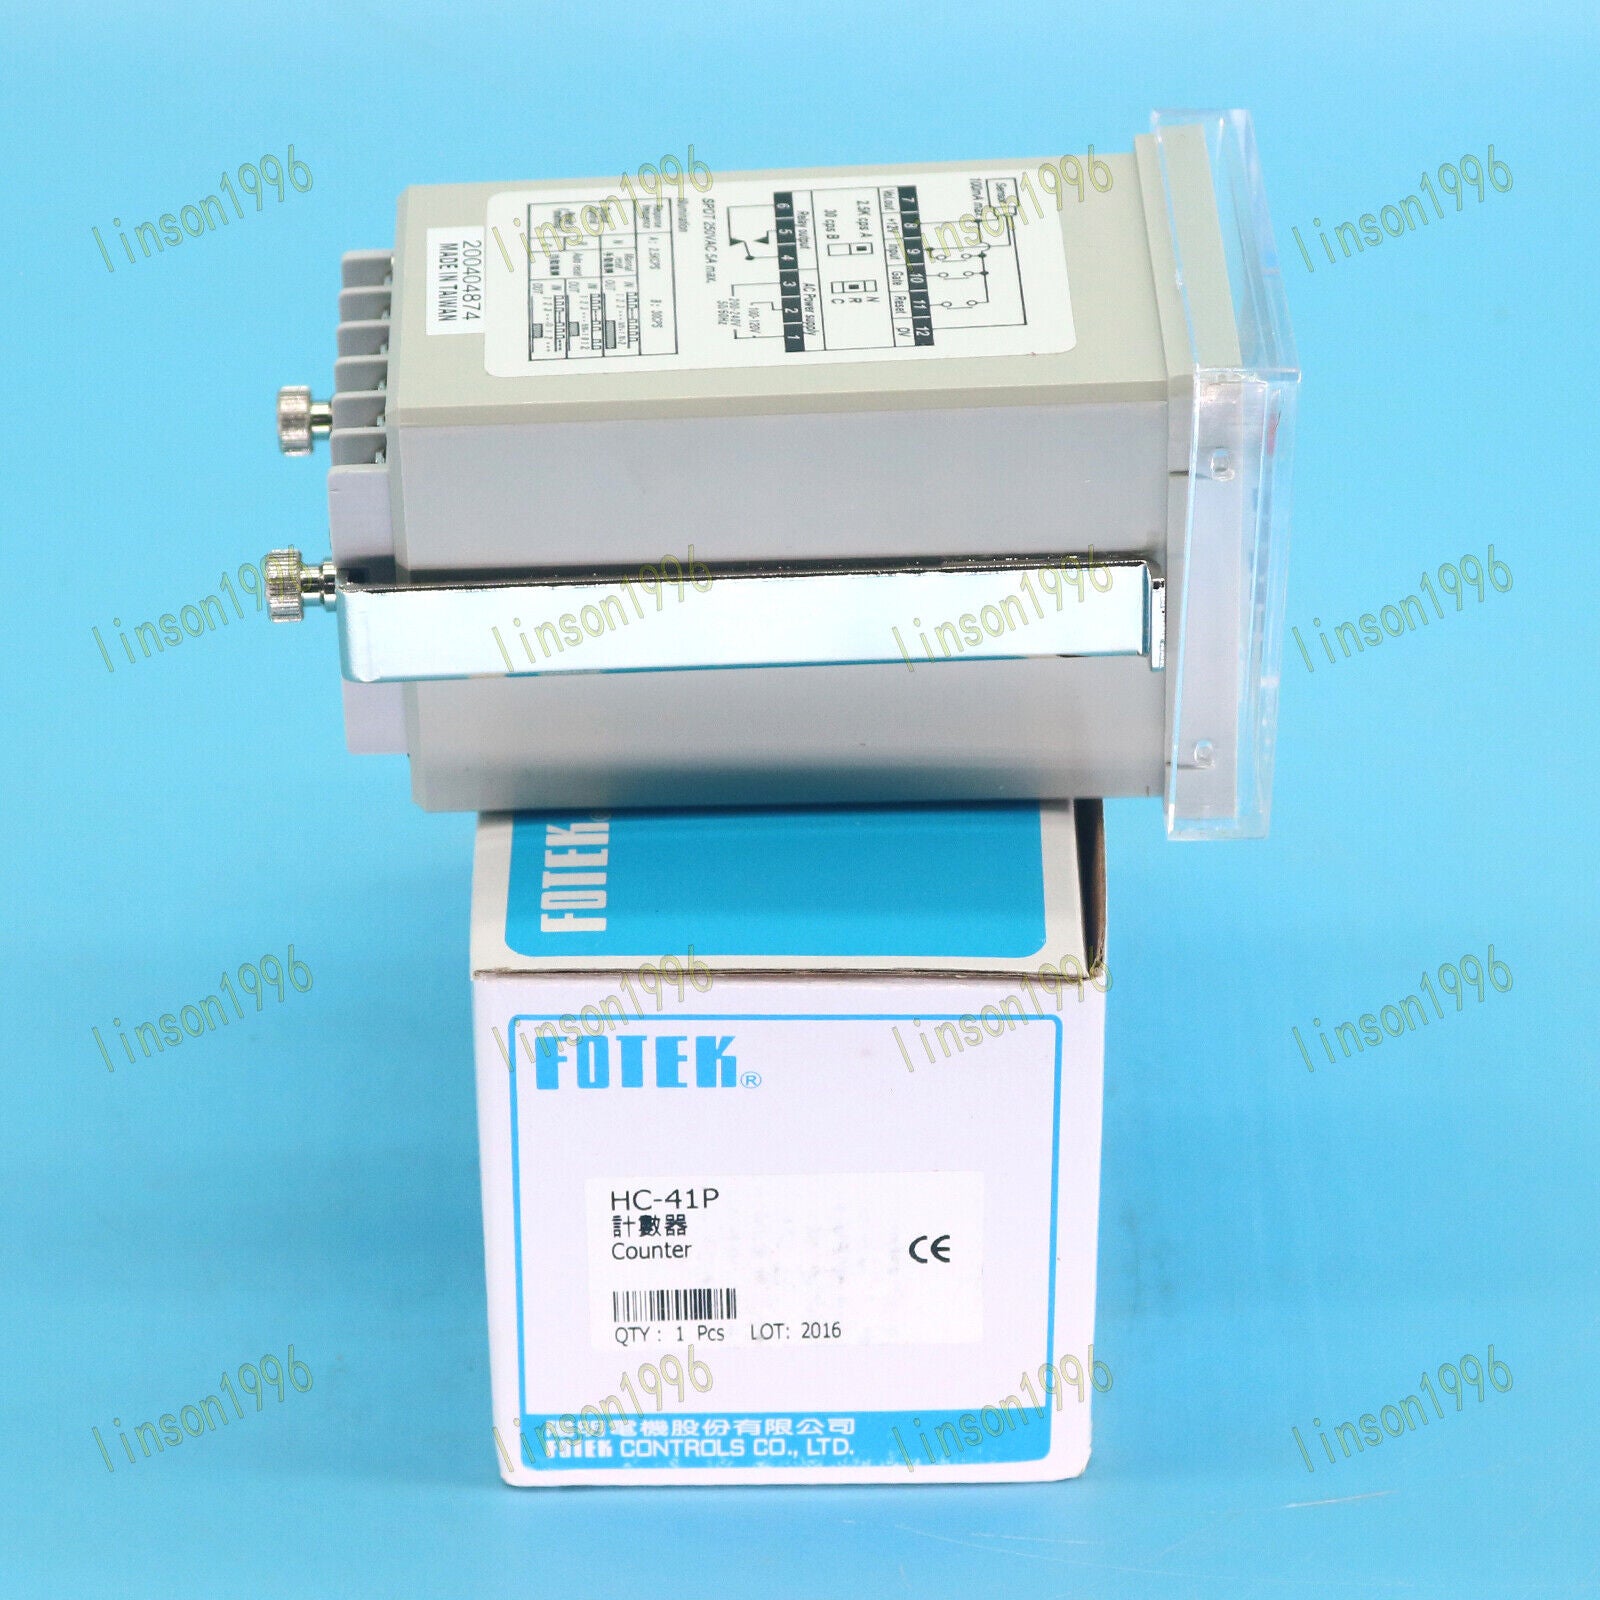 new 1PC  For FOTEK Counter HC-41P In Box ship